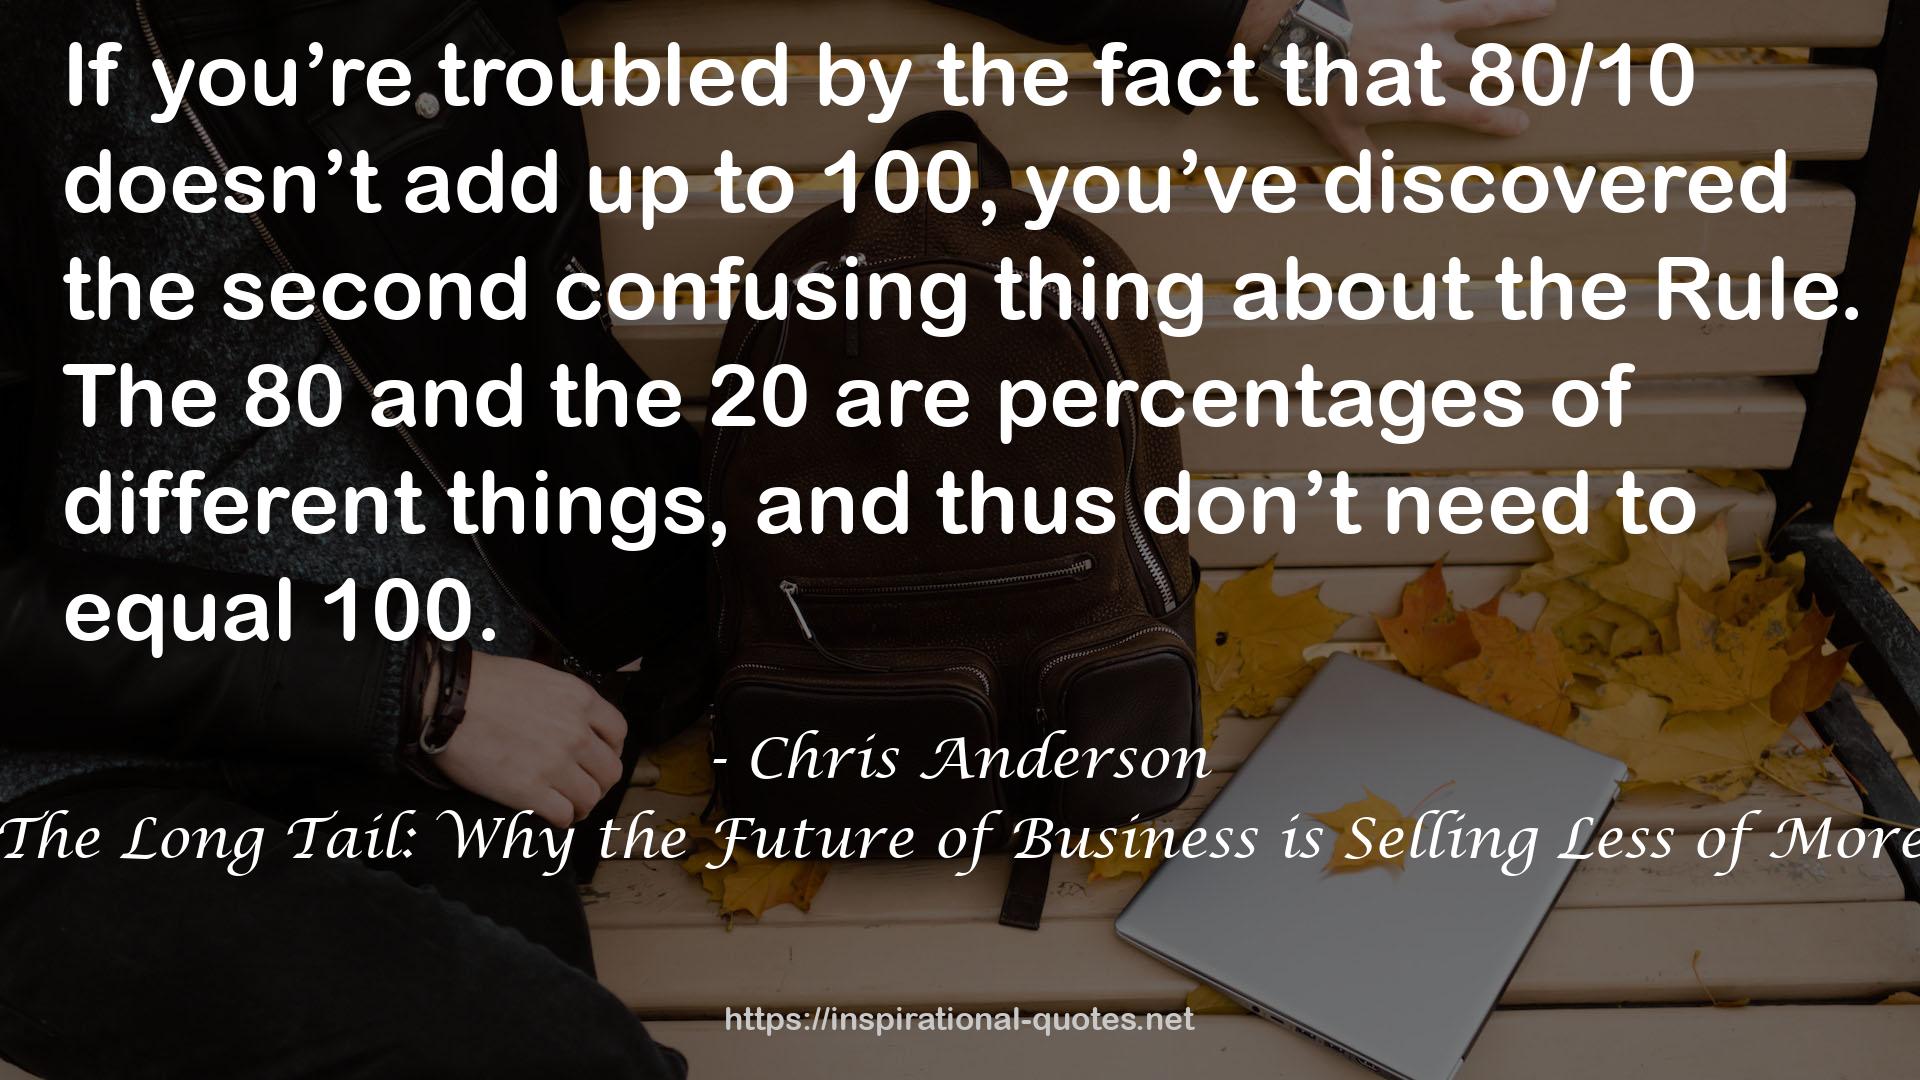 Chris Anderson QUOTES